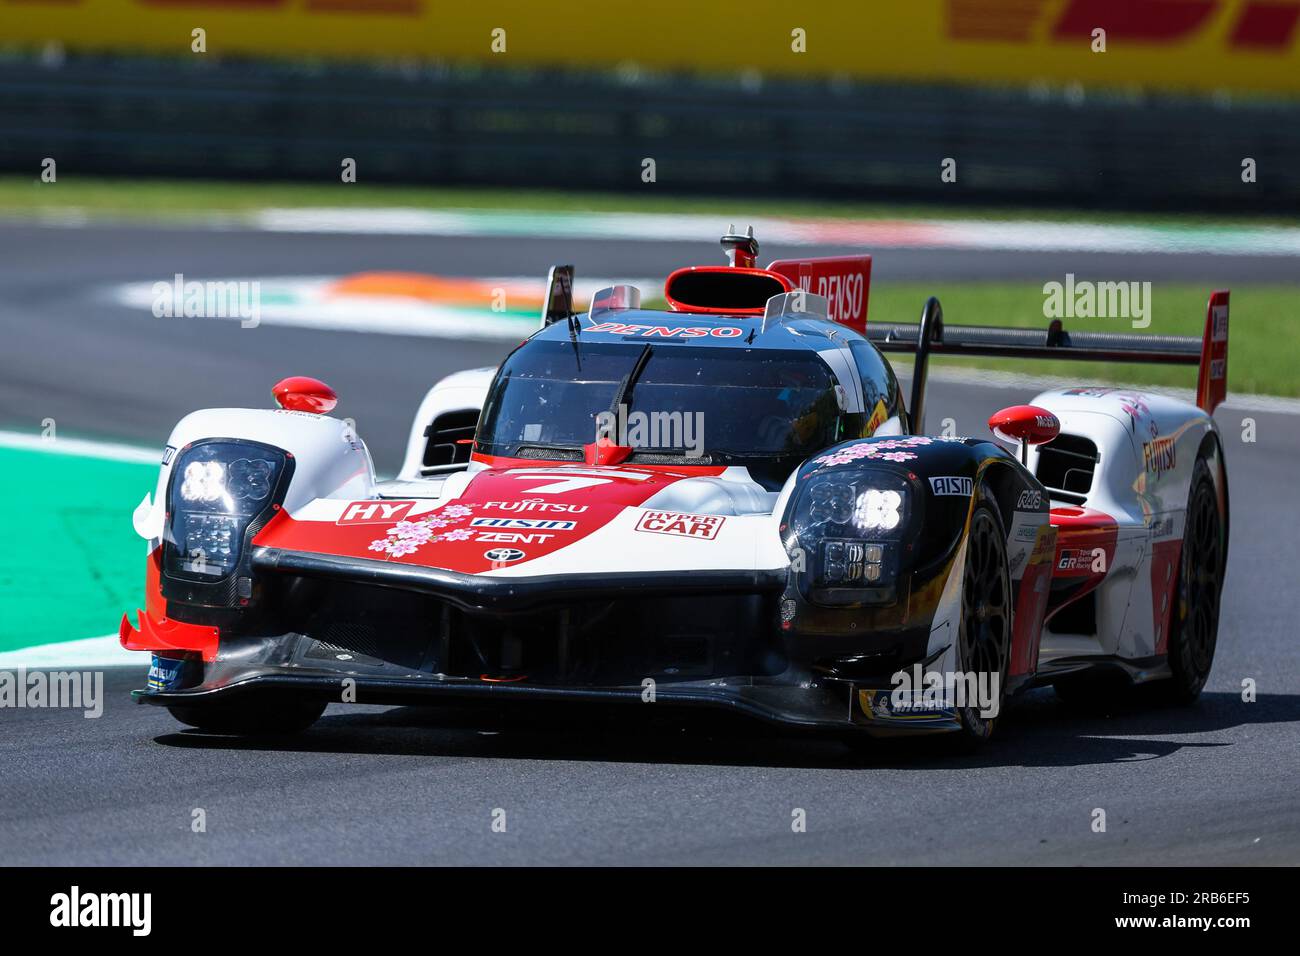 Monza, Italy. 07th July, 2023. Toyota Gazoo Racing - Toyota GR010 Hybrid of Kamui Kobayashi (JPN) competes during the WEC FIA World Endurance Championship 6 Hours of Monza 2023 at Autodromo Nazionale Monza. (Photo by Fabrizio Carabelli/SOPA Images/Sipa USA) Credit: Sipa USA/Alamy Live News Stock Photo